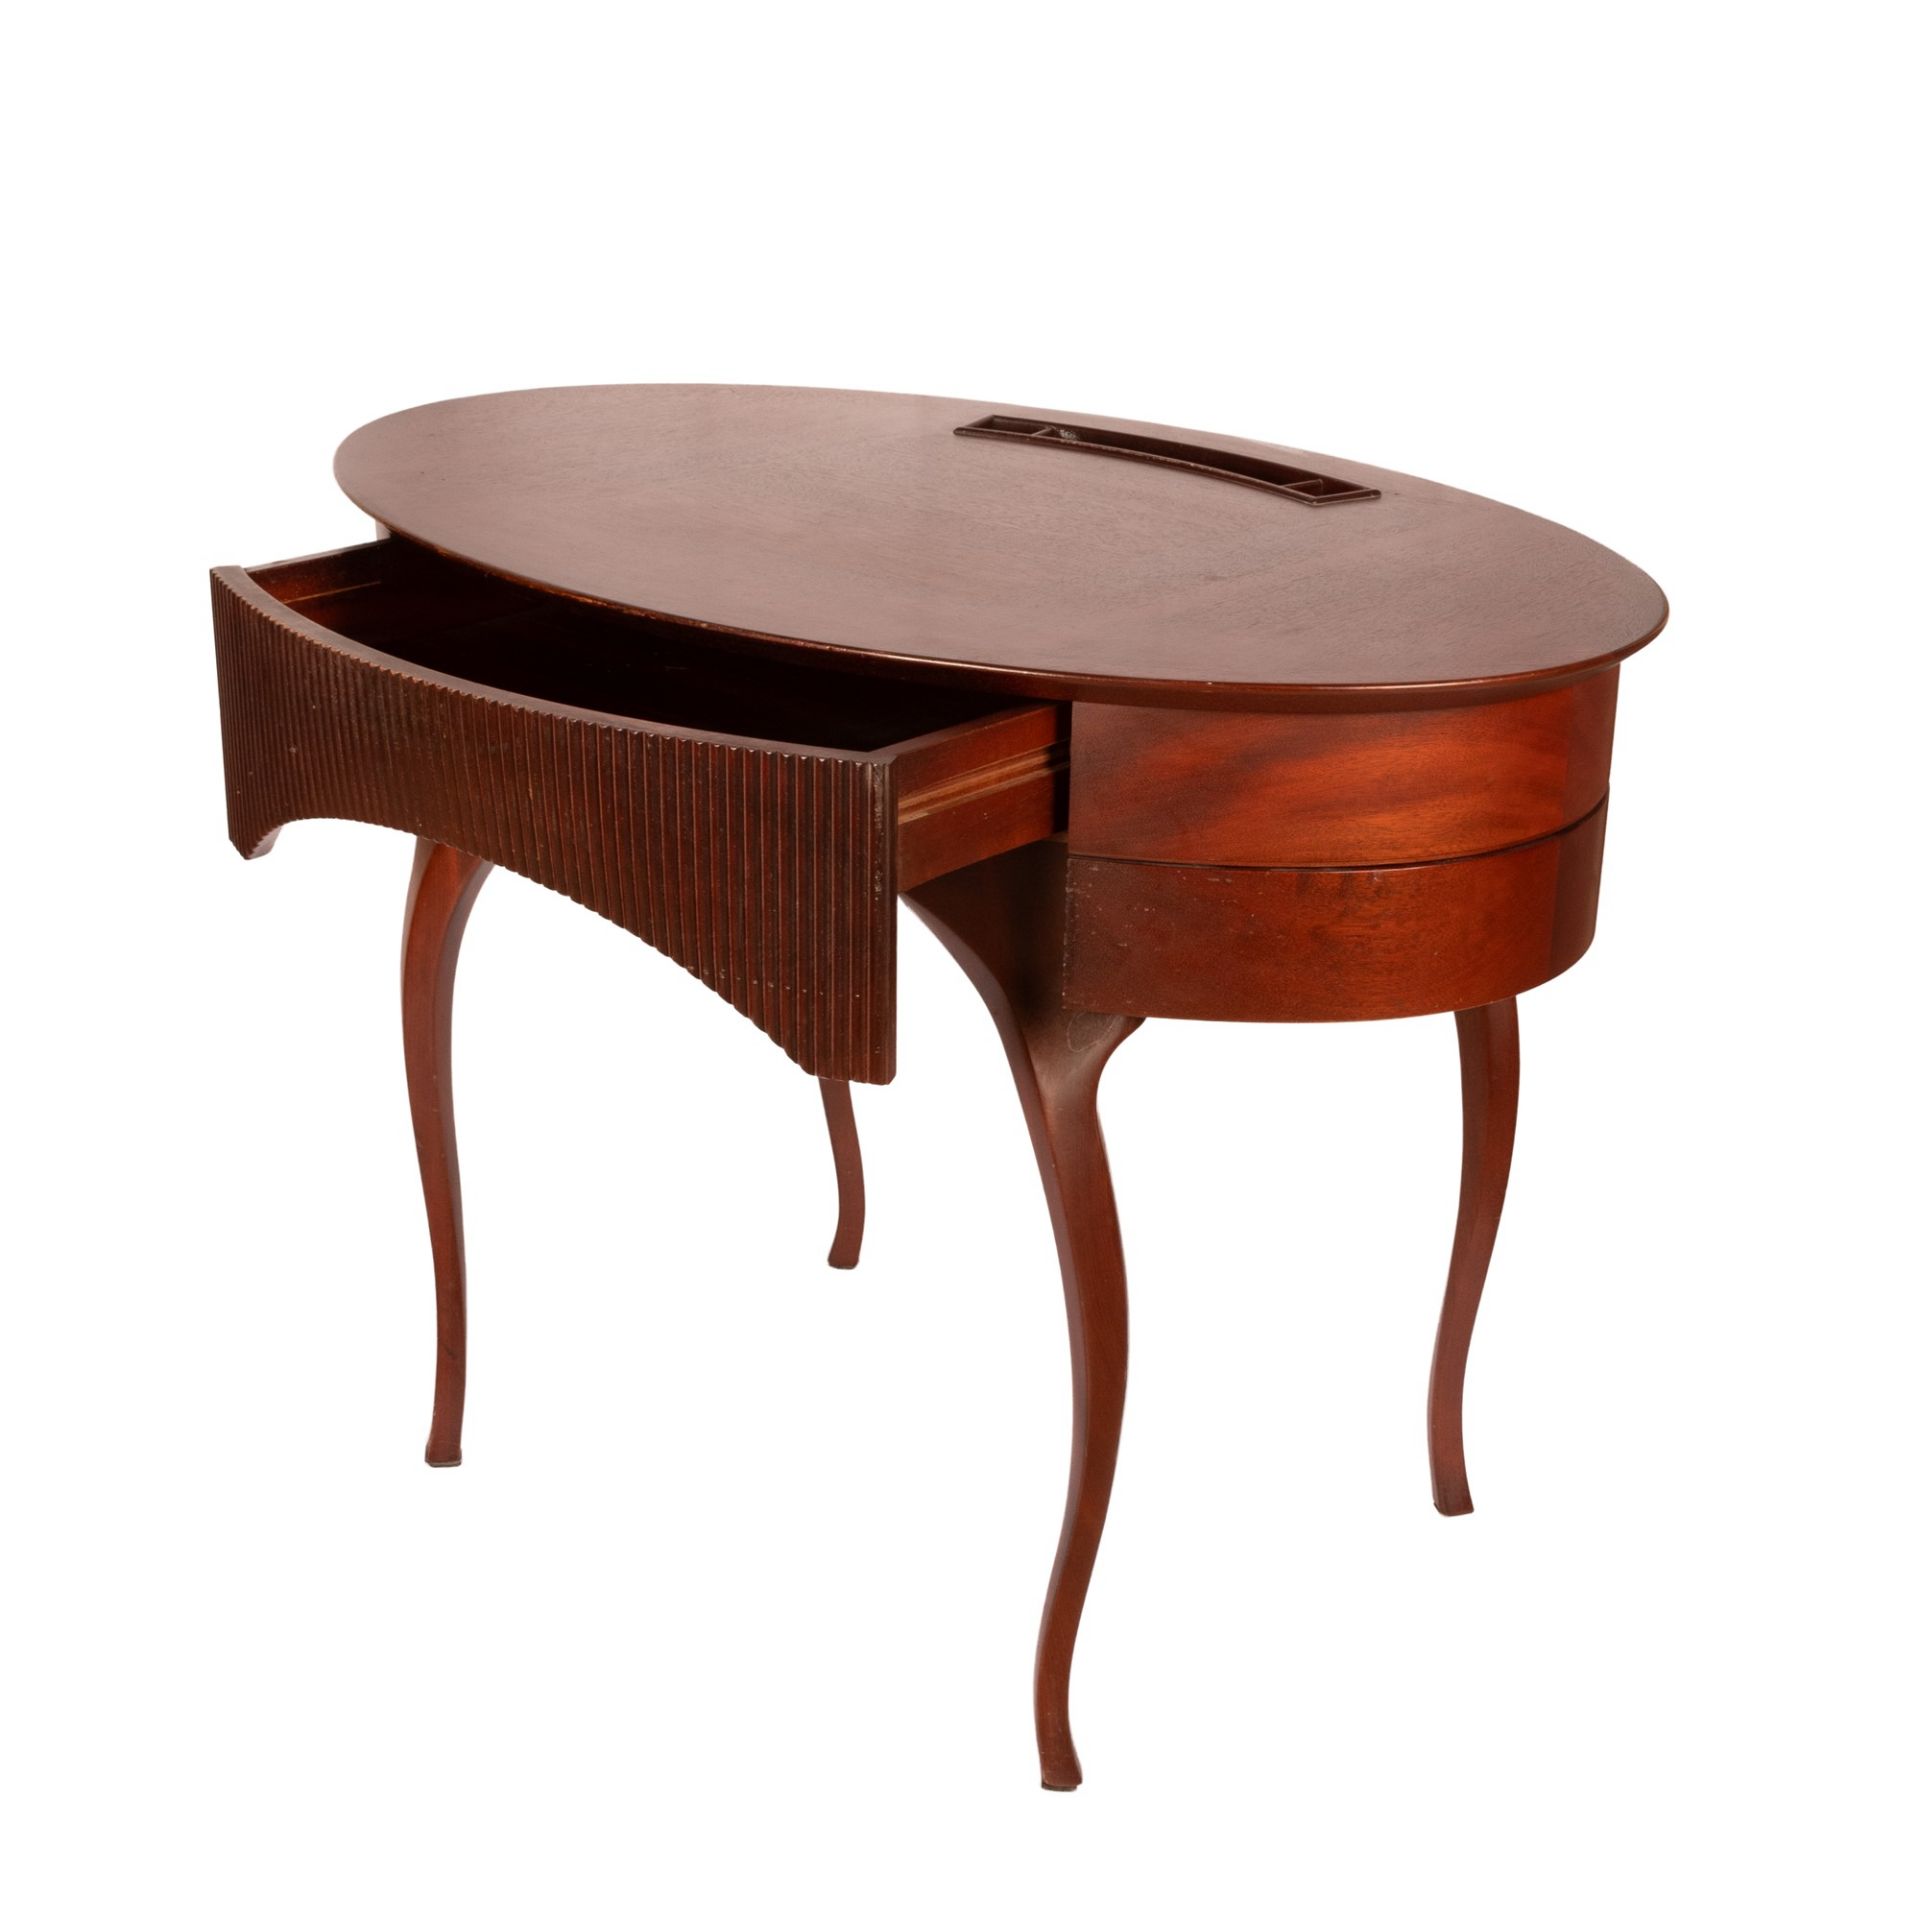 Writing desk in cherry wood - Image 7 of 25